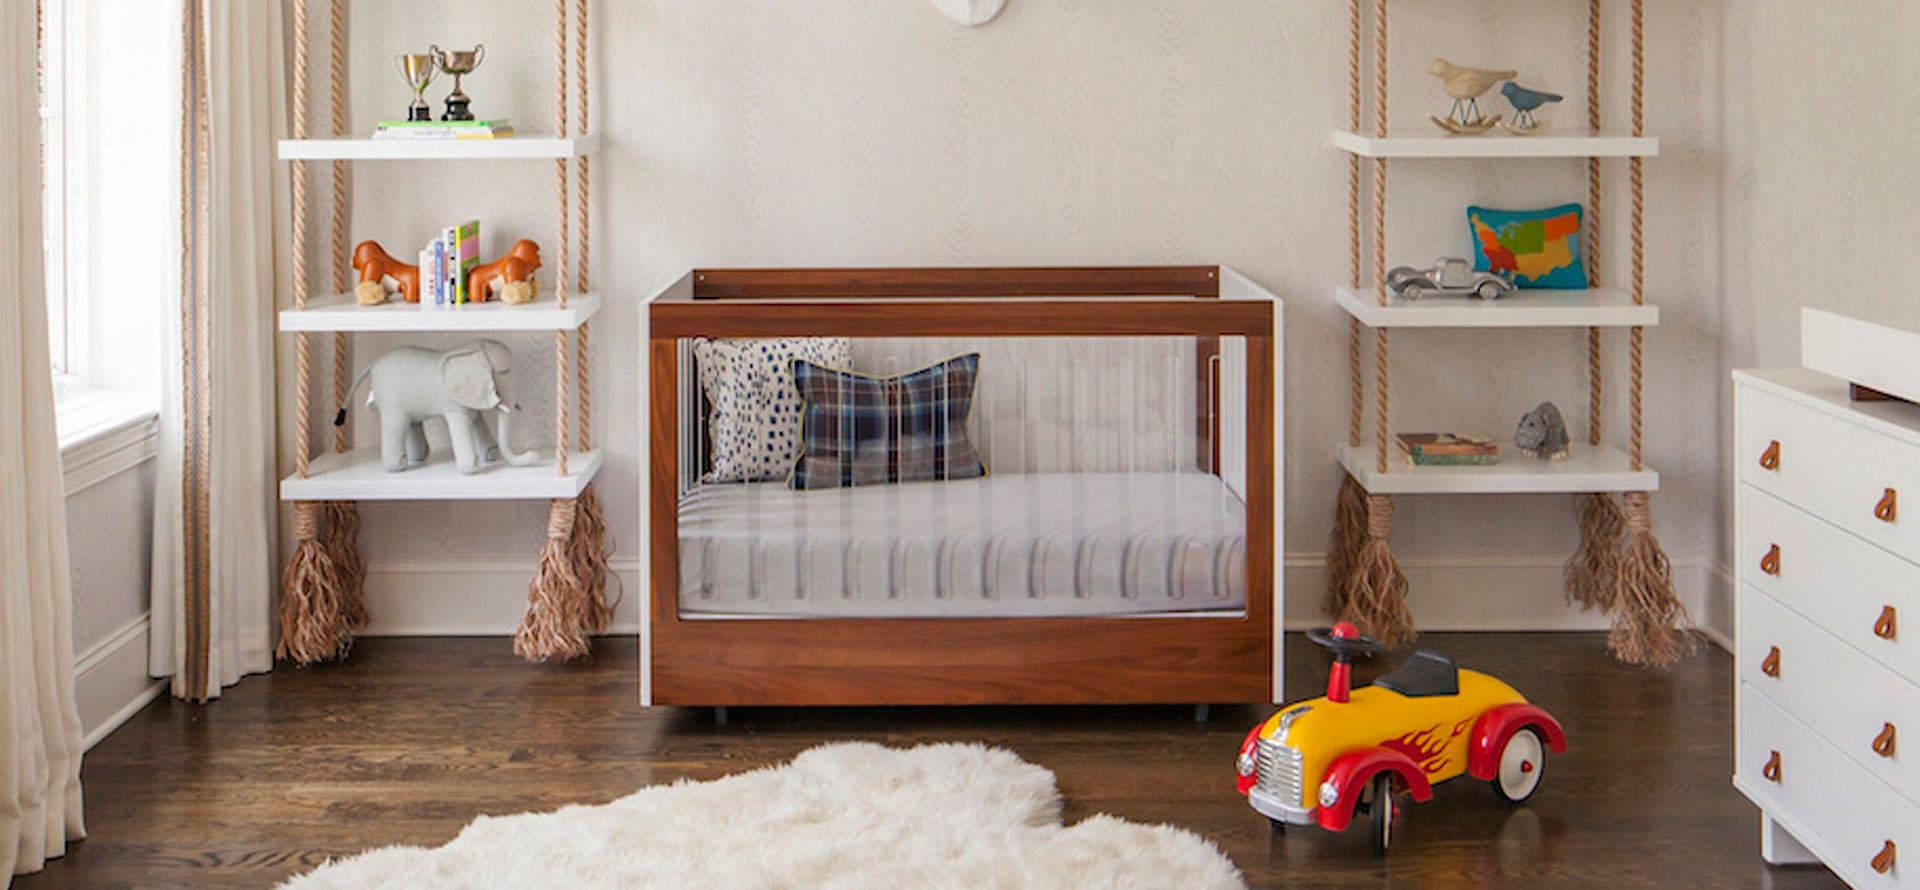 Crib with an organic mattress in the children's room.